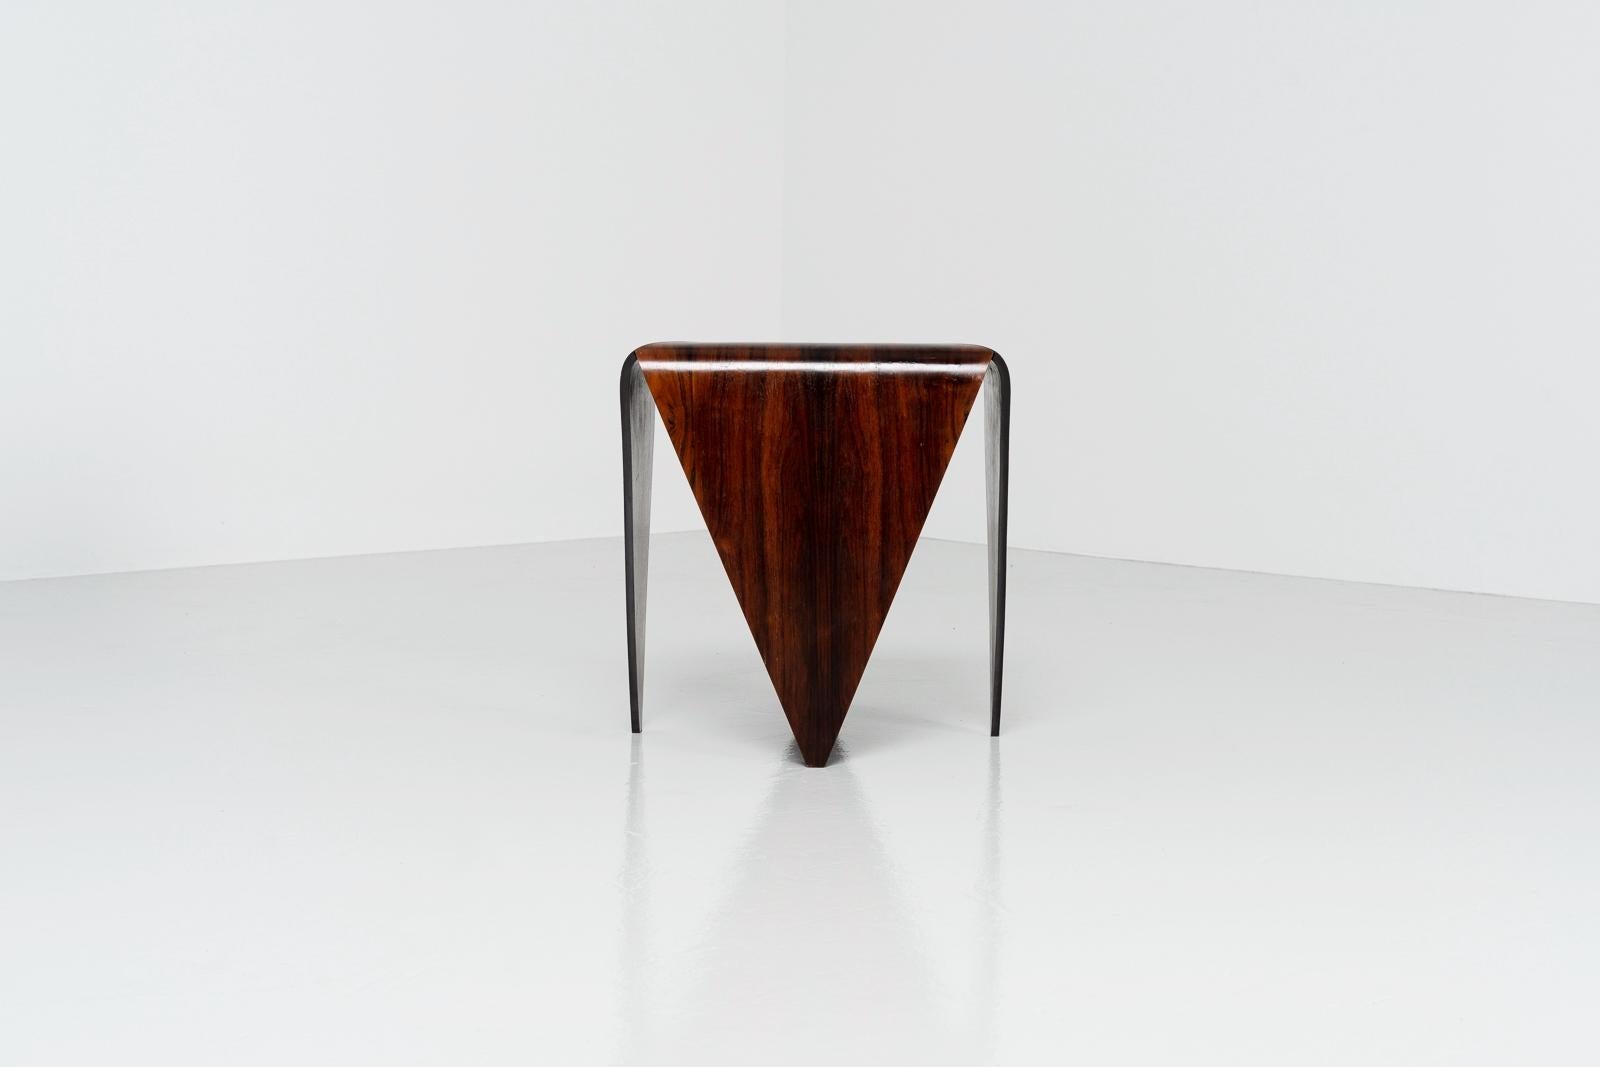 Beautiful so called ‘Petalas’ side table designed by recently passed away designer Jorge Zalszupin, manufactured in his own company L’Atelier, Brazil 1959. The Petalas tables were inspirede by a folded paper structure of origami. This table is